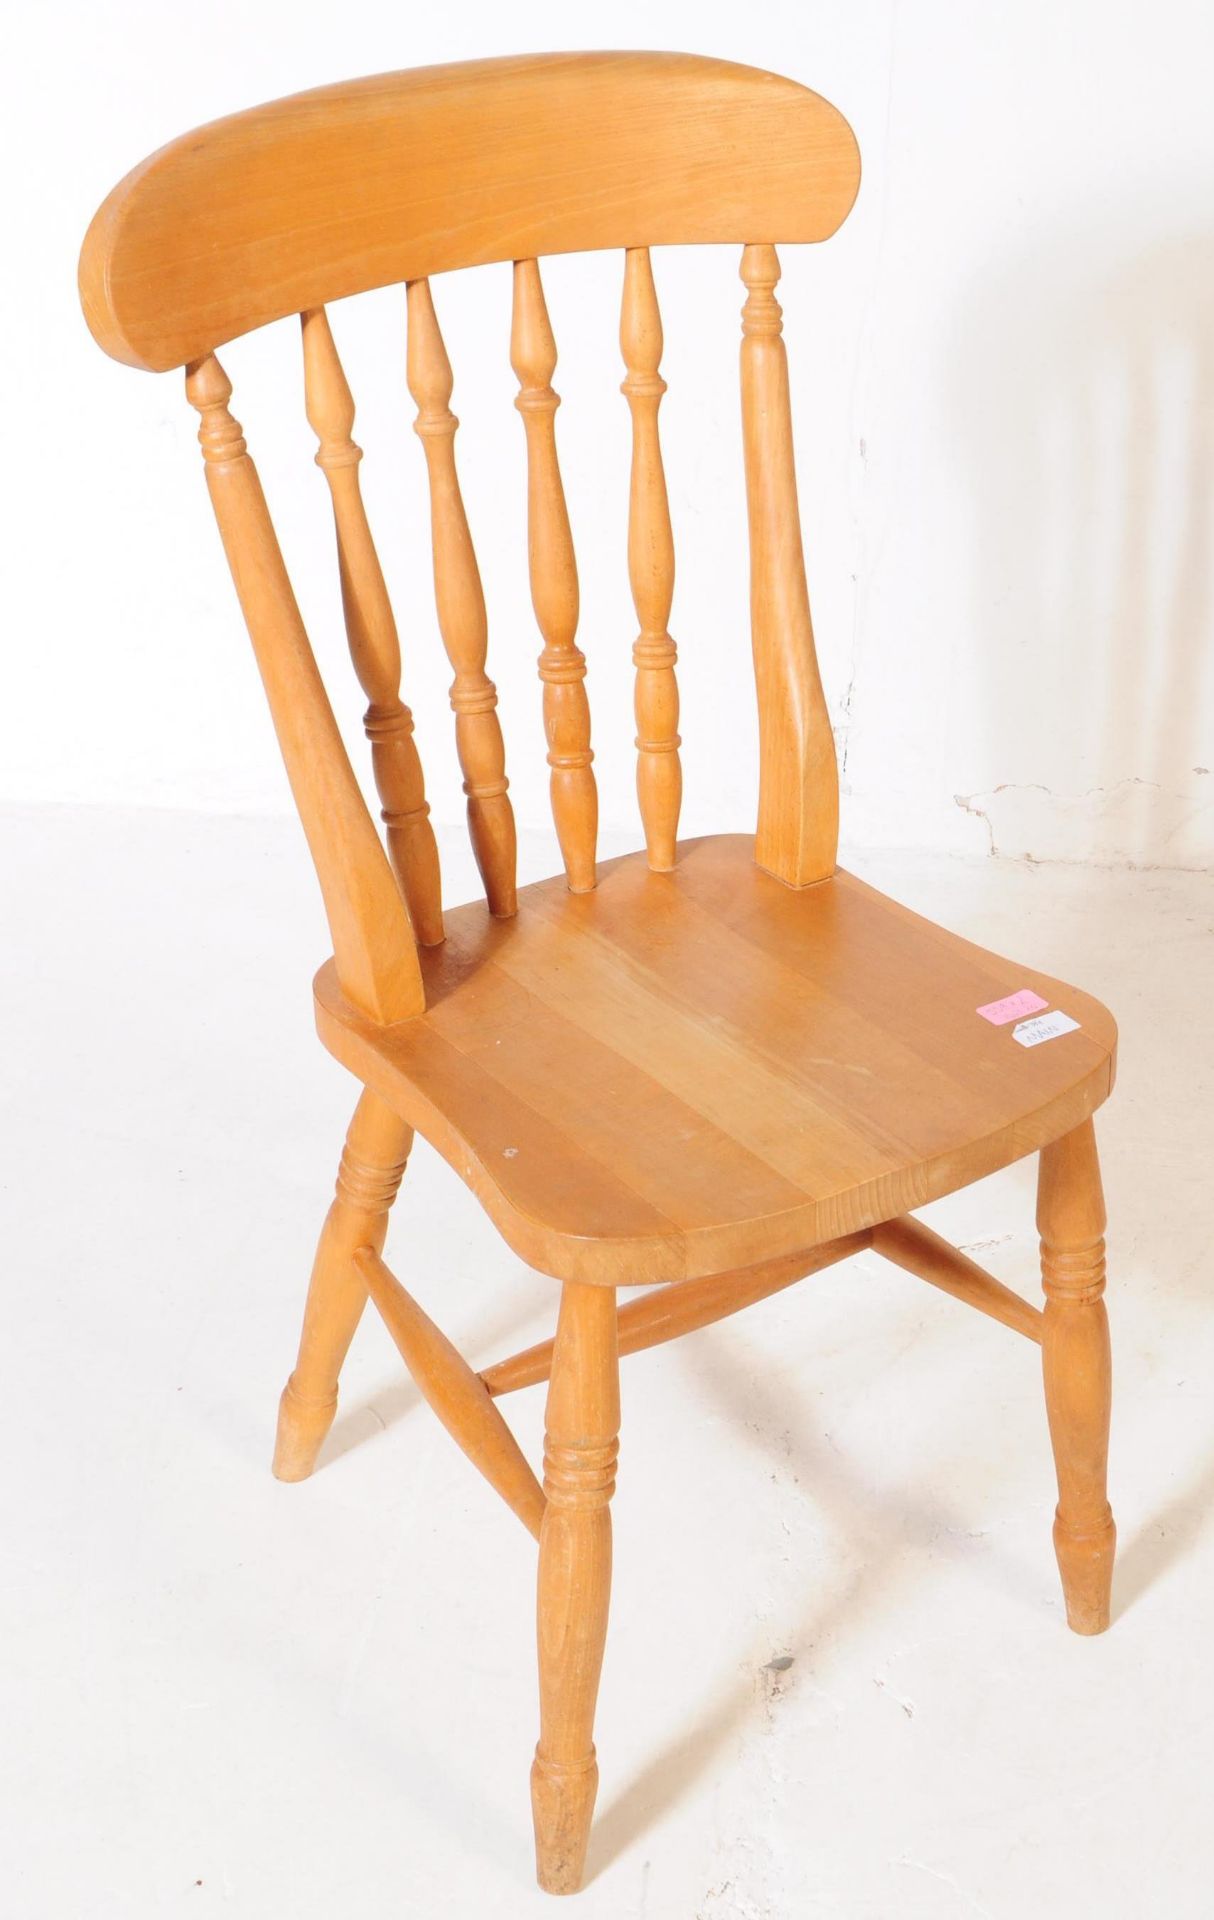 CONTEMPORARY PINE FARMHOUSE KITCHEN CHAIR W/ SIDE TABLE - Image 4 of 7